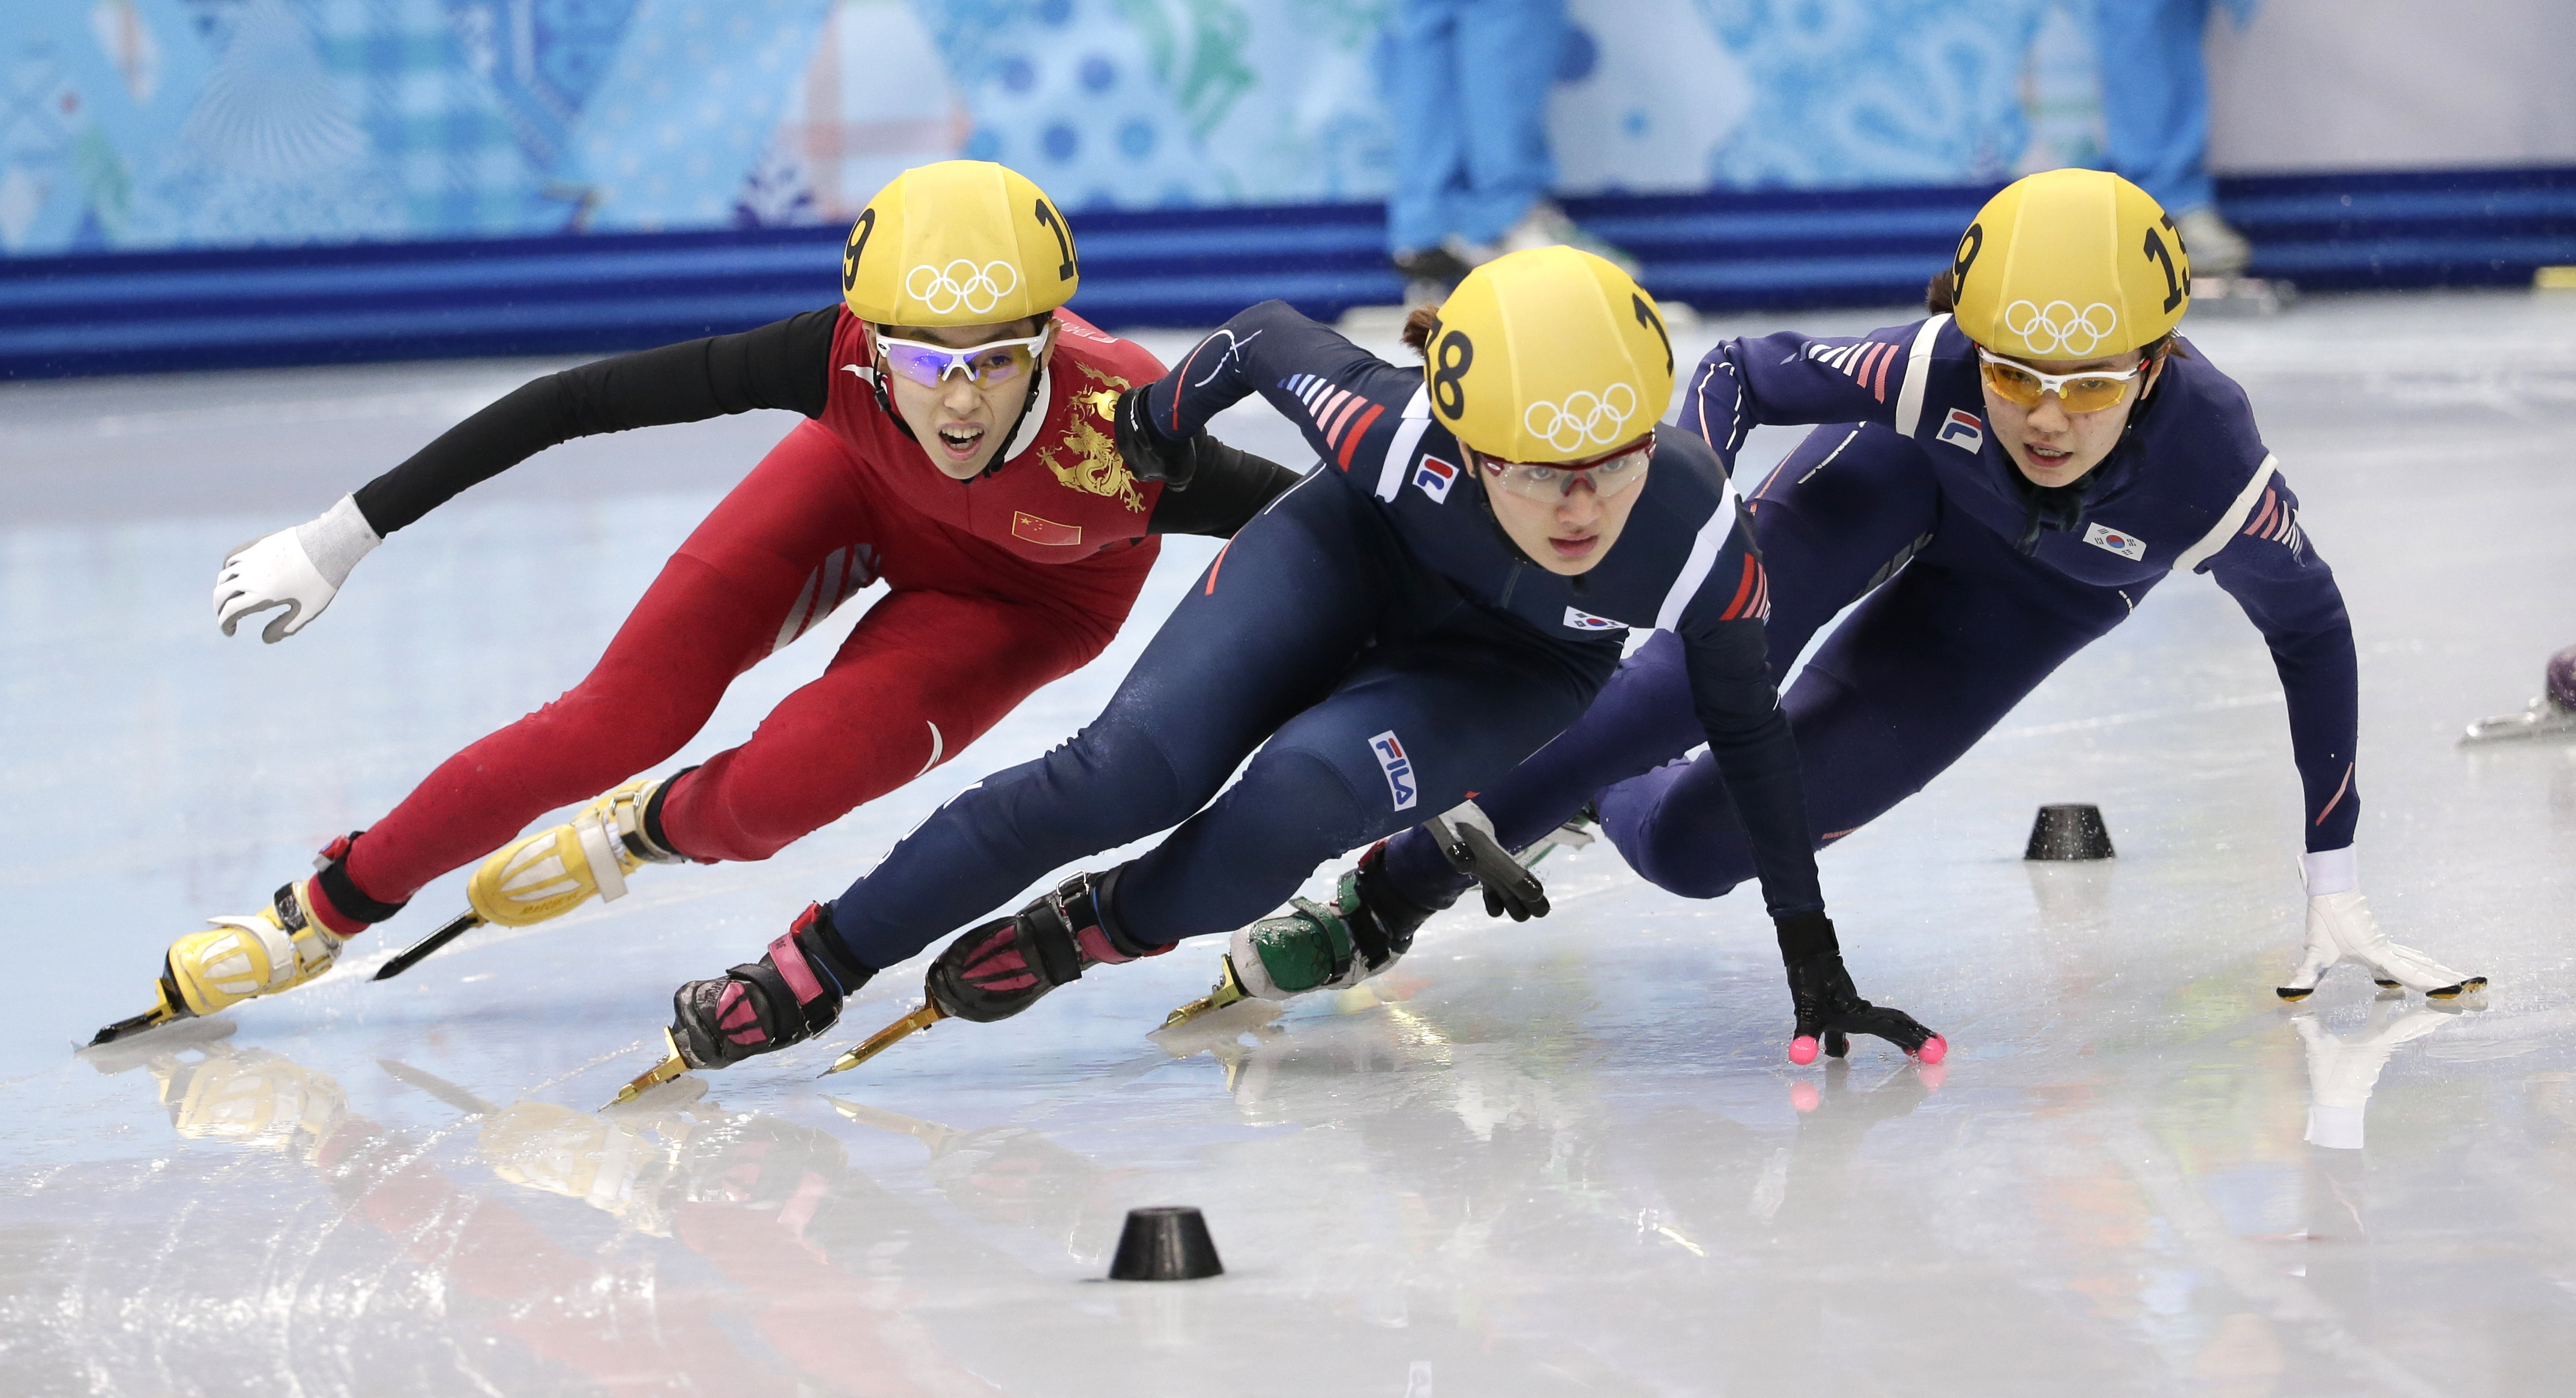 From left, Fan Kexin of China, Park Seung-hi of South Korea and Shim Suk-Hee of South Korea compete in the women's 1000m short track speedskating final at the Iceberg Skating Palace during the 2014 Winter Olympics, Friday, Feb. 21, 2014, in Sochi, Russia. (AP Photo/Bernat Armangue)